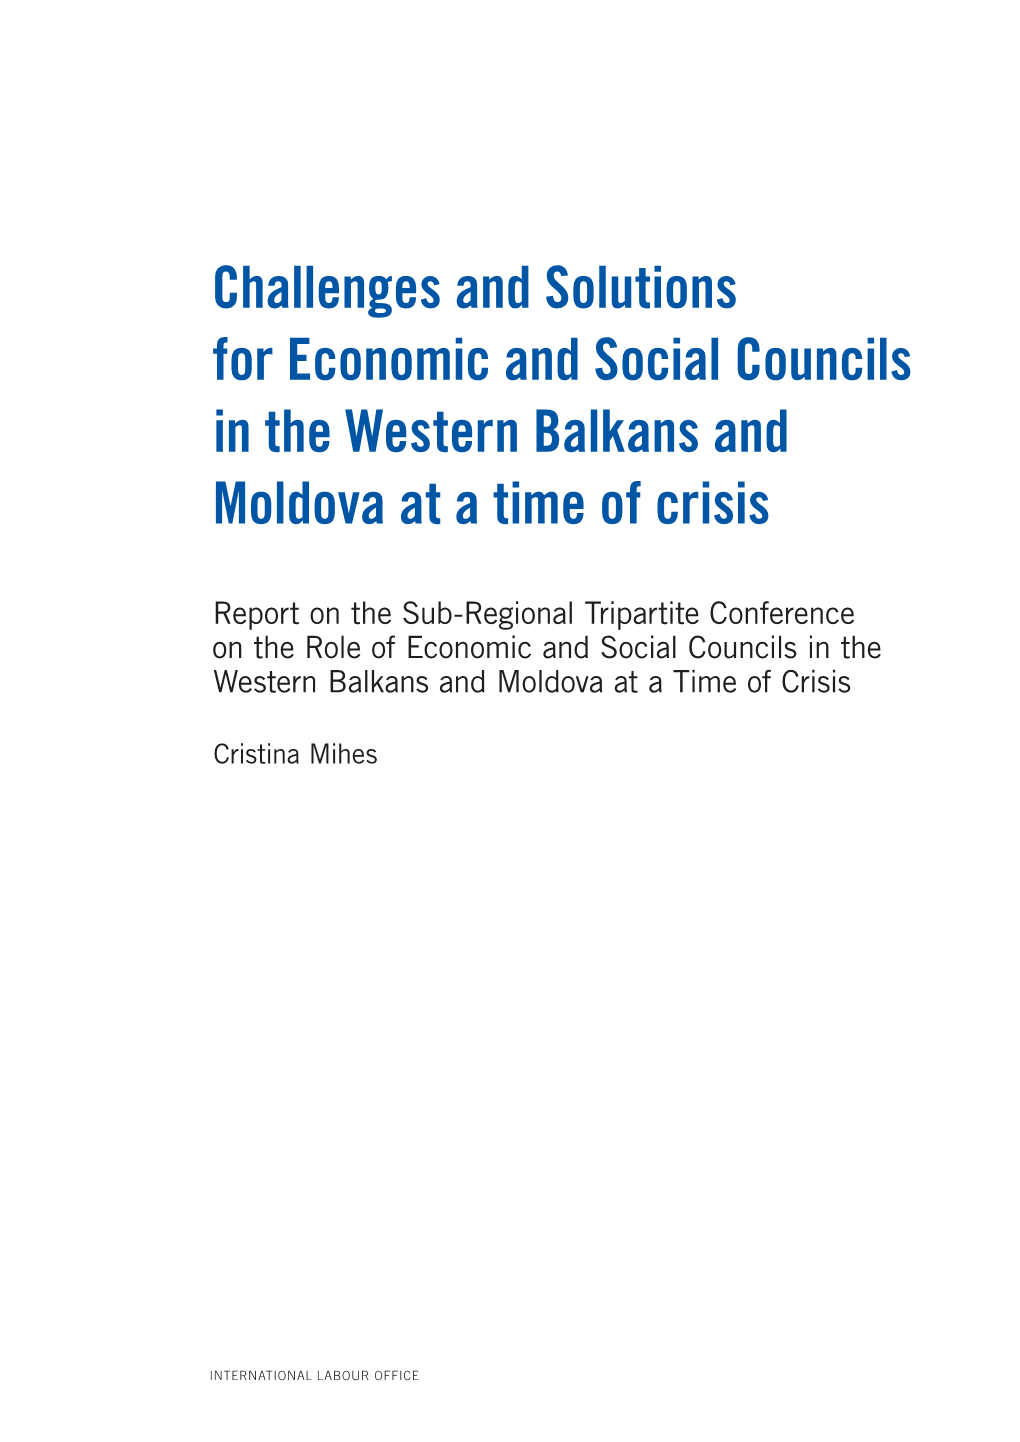 Challenges and Solutions for Economic and Social Councils in the Western Balkans and Moldova at a Time of Crisis